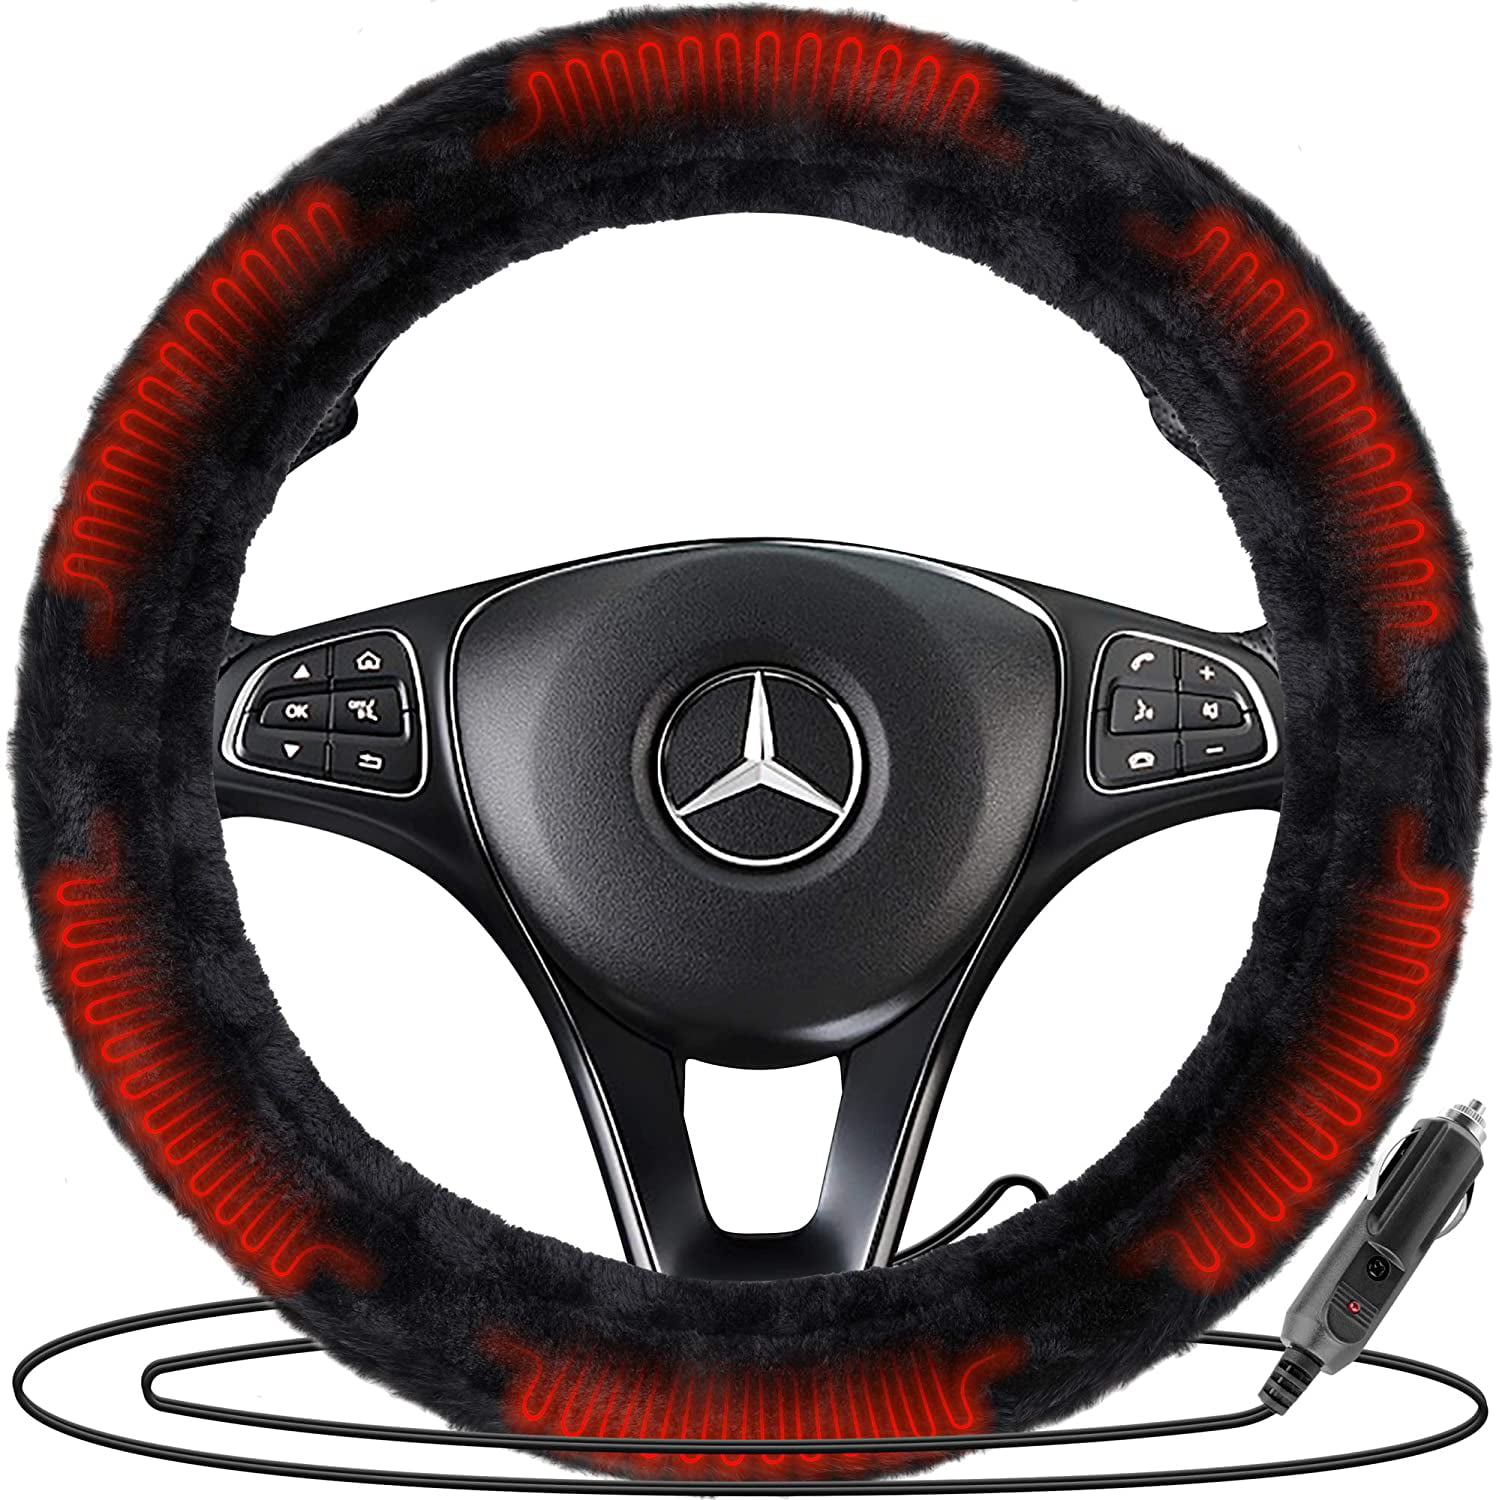 Premium Quality Universal Fit Comfortable Feeling Heated Steering Wheel Cover,12V Car Plug Elegant Design Auto Steering Wheel Black Protector Cover with Heater 